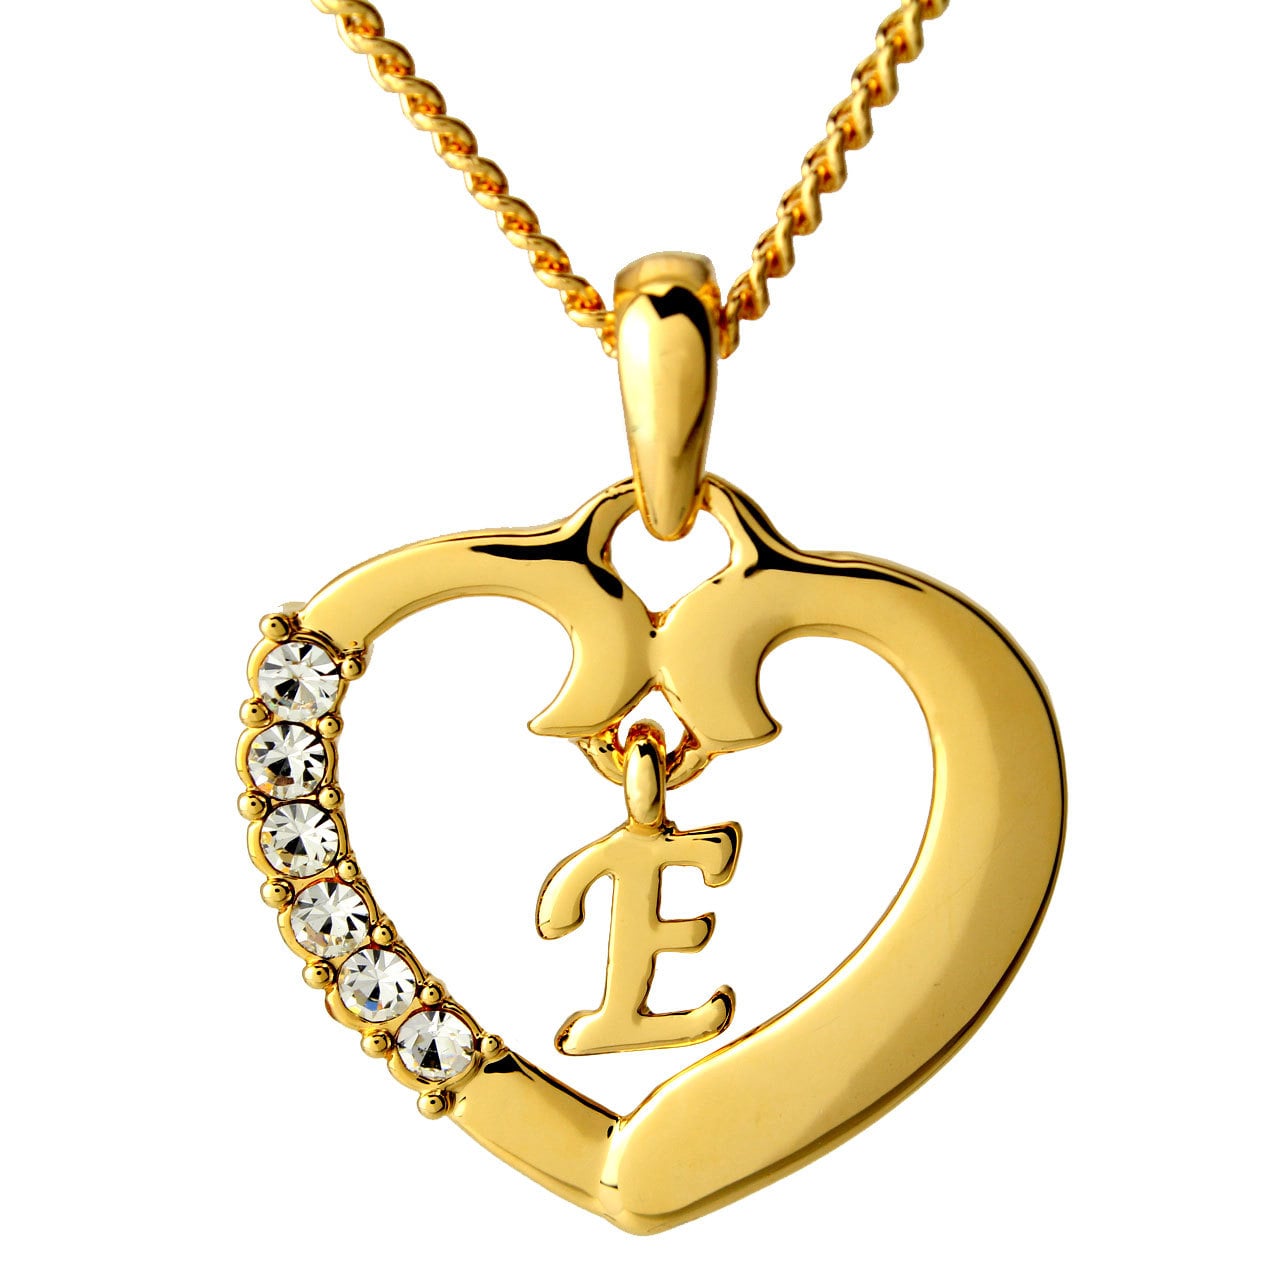 Heart Necklace Earrings Set Gold Plated Wedding Gift Chain Pendant UK Eid Gifts